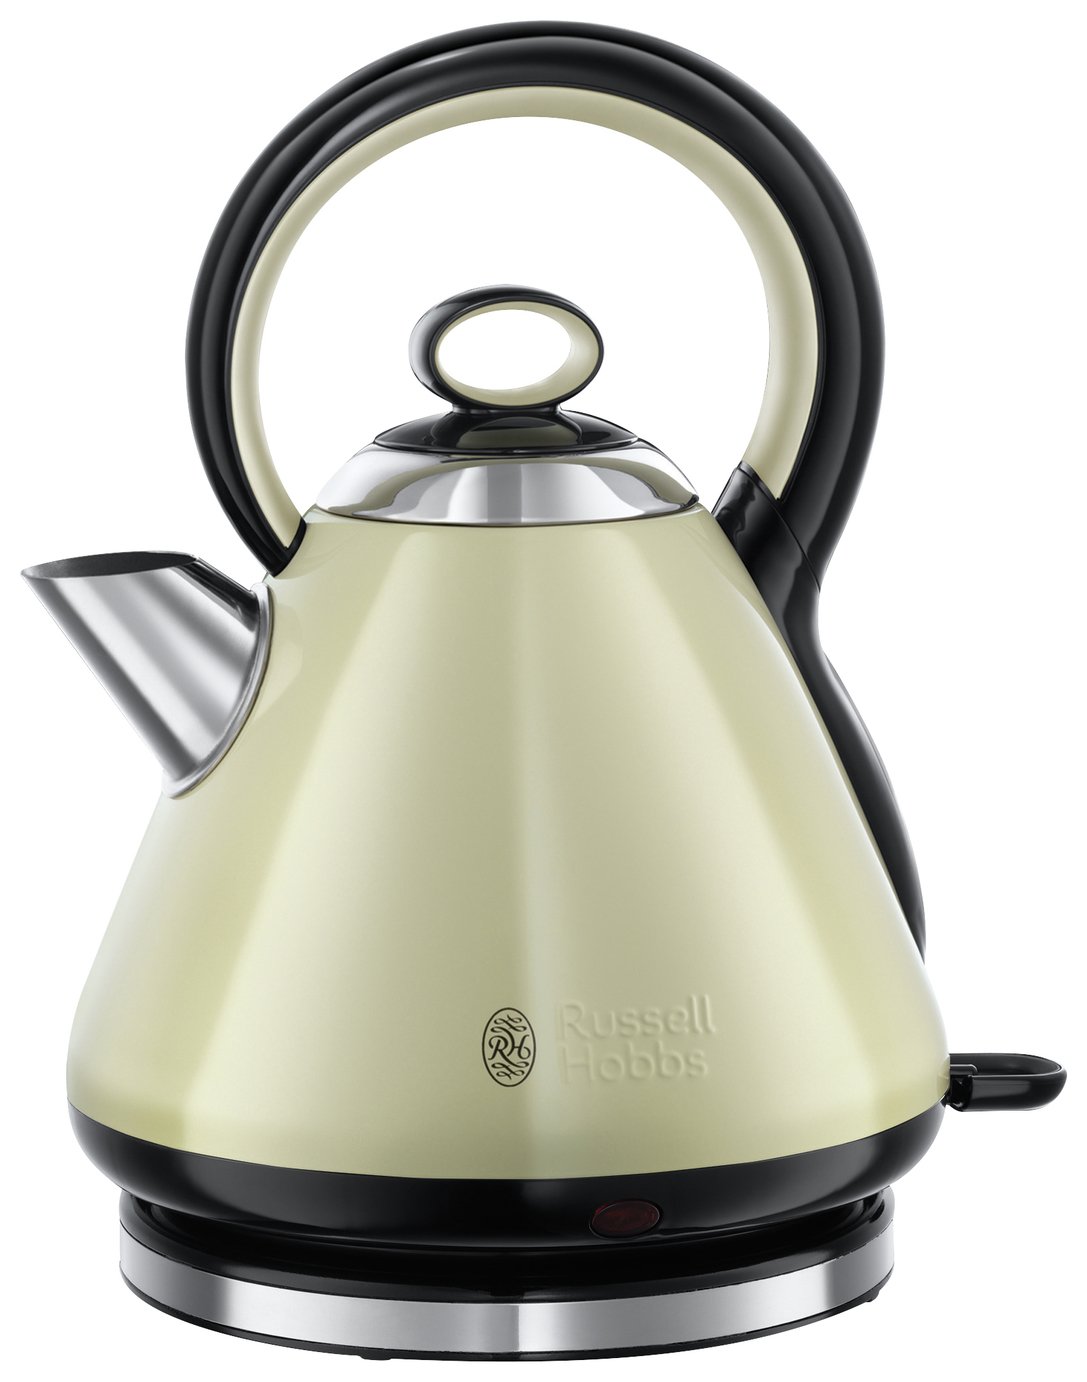 Russell Hobbs 21888 Legacy Quiet Boil Kettle - Cream